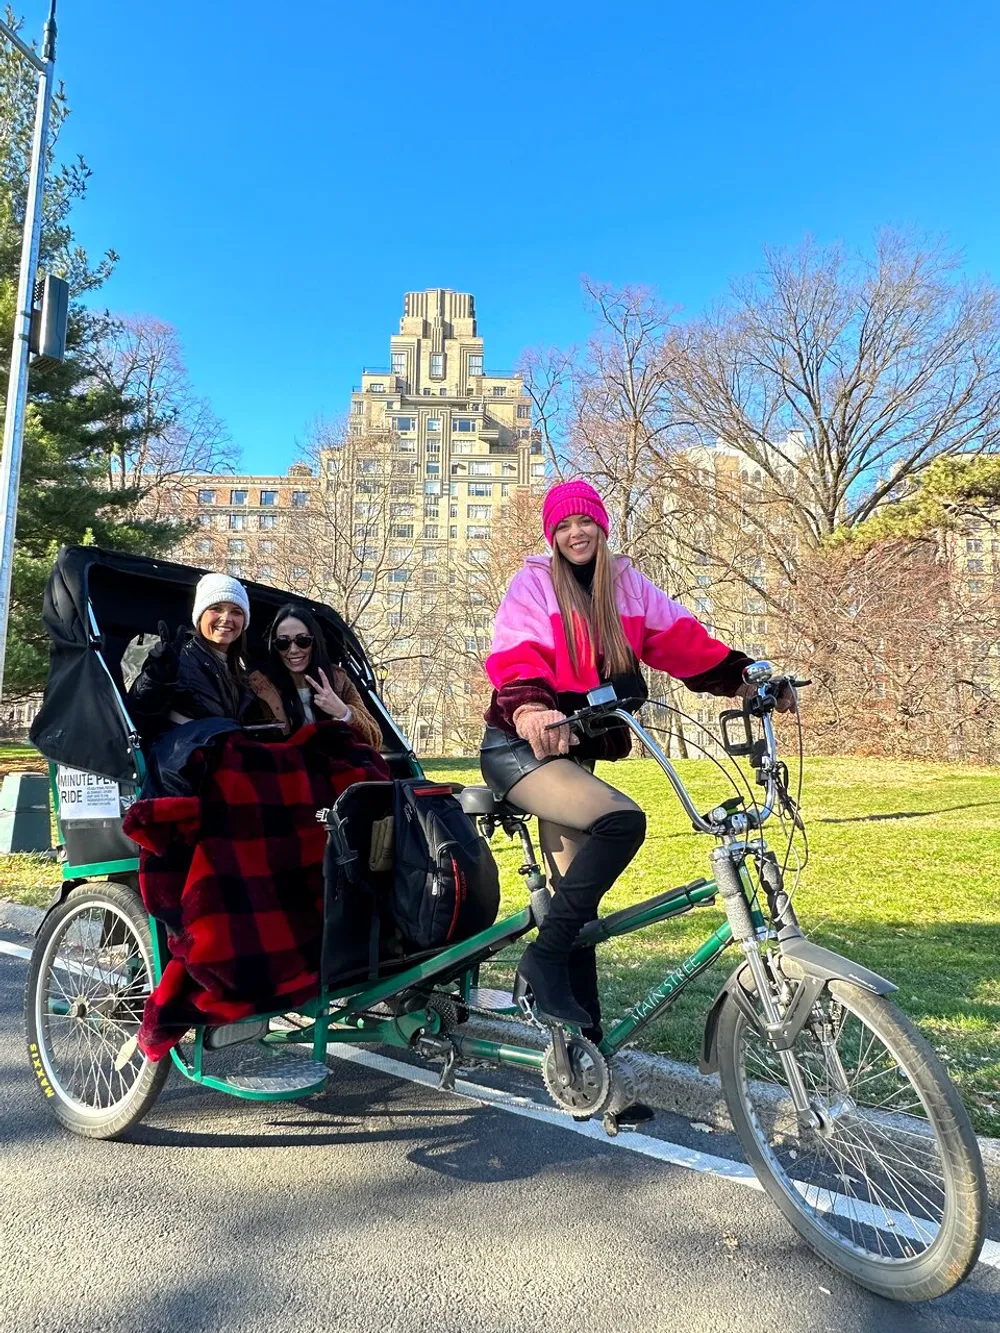 A rickshaw cyclist wearing a bright pink beanie is posing for a photo while two passengers are seated in the carriage enjoying a sunny day outdoors with a backdrop of bare trees and a tall building